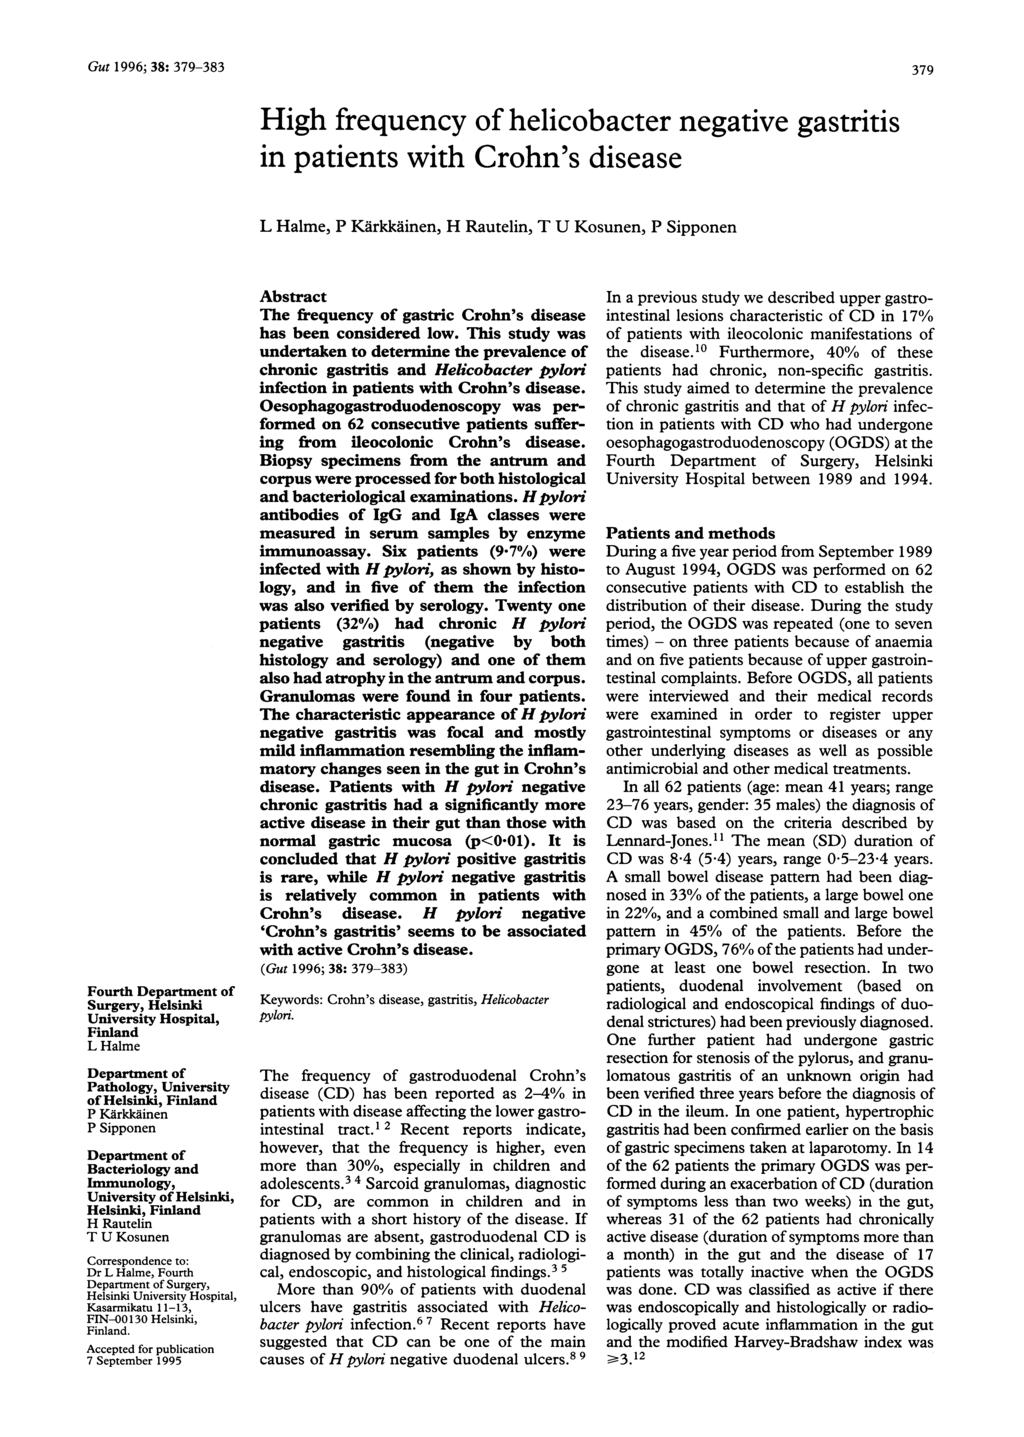 Gut 1996; 38: 379-383 High frequency of helicobacter negative gastritis in patients with Crohn's disease 379 L Halme, P Karkkainen, H Rautelin, T U Kosunen, P Sipponen Fourth Department of Surgery,